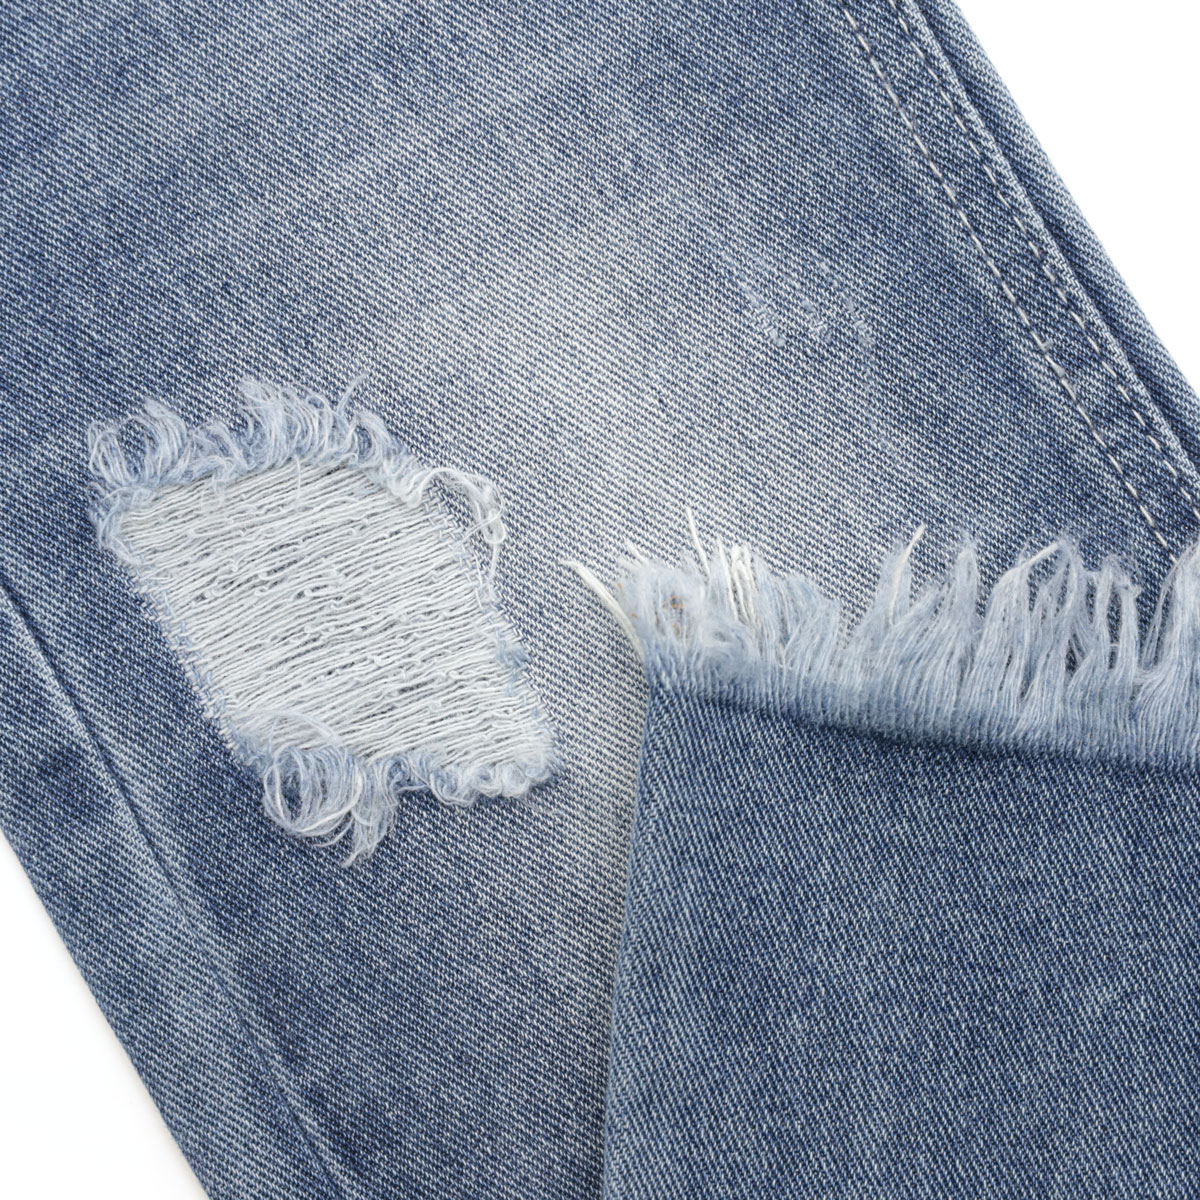 How to Care for Super Denim Wholesale 2